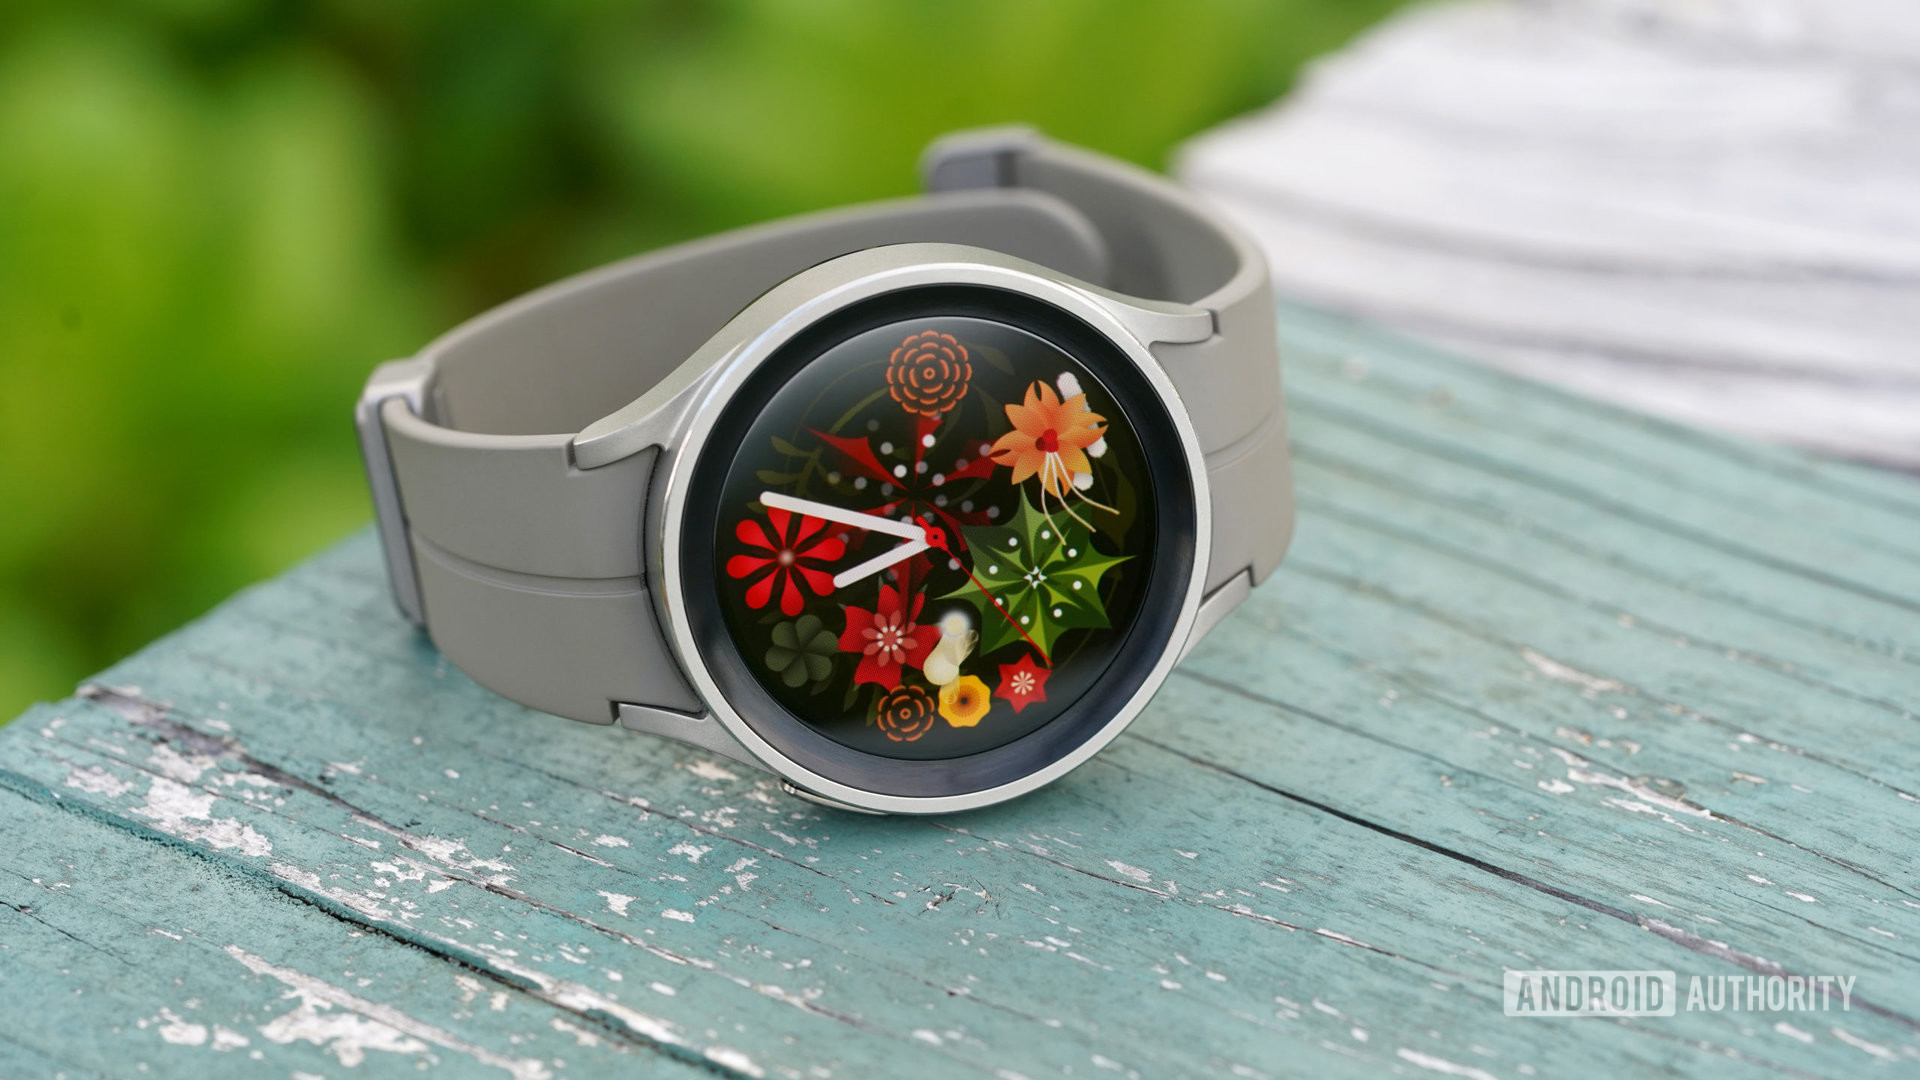 A Galaxy Watch 5 Pro rests on a table displaying the Flower Garden watch face.